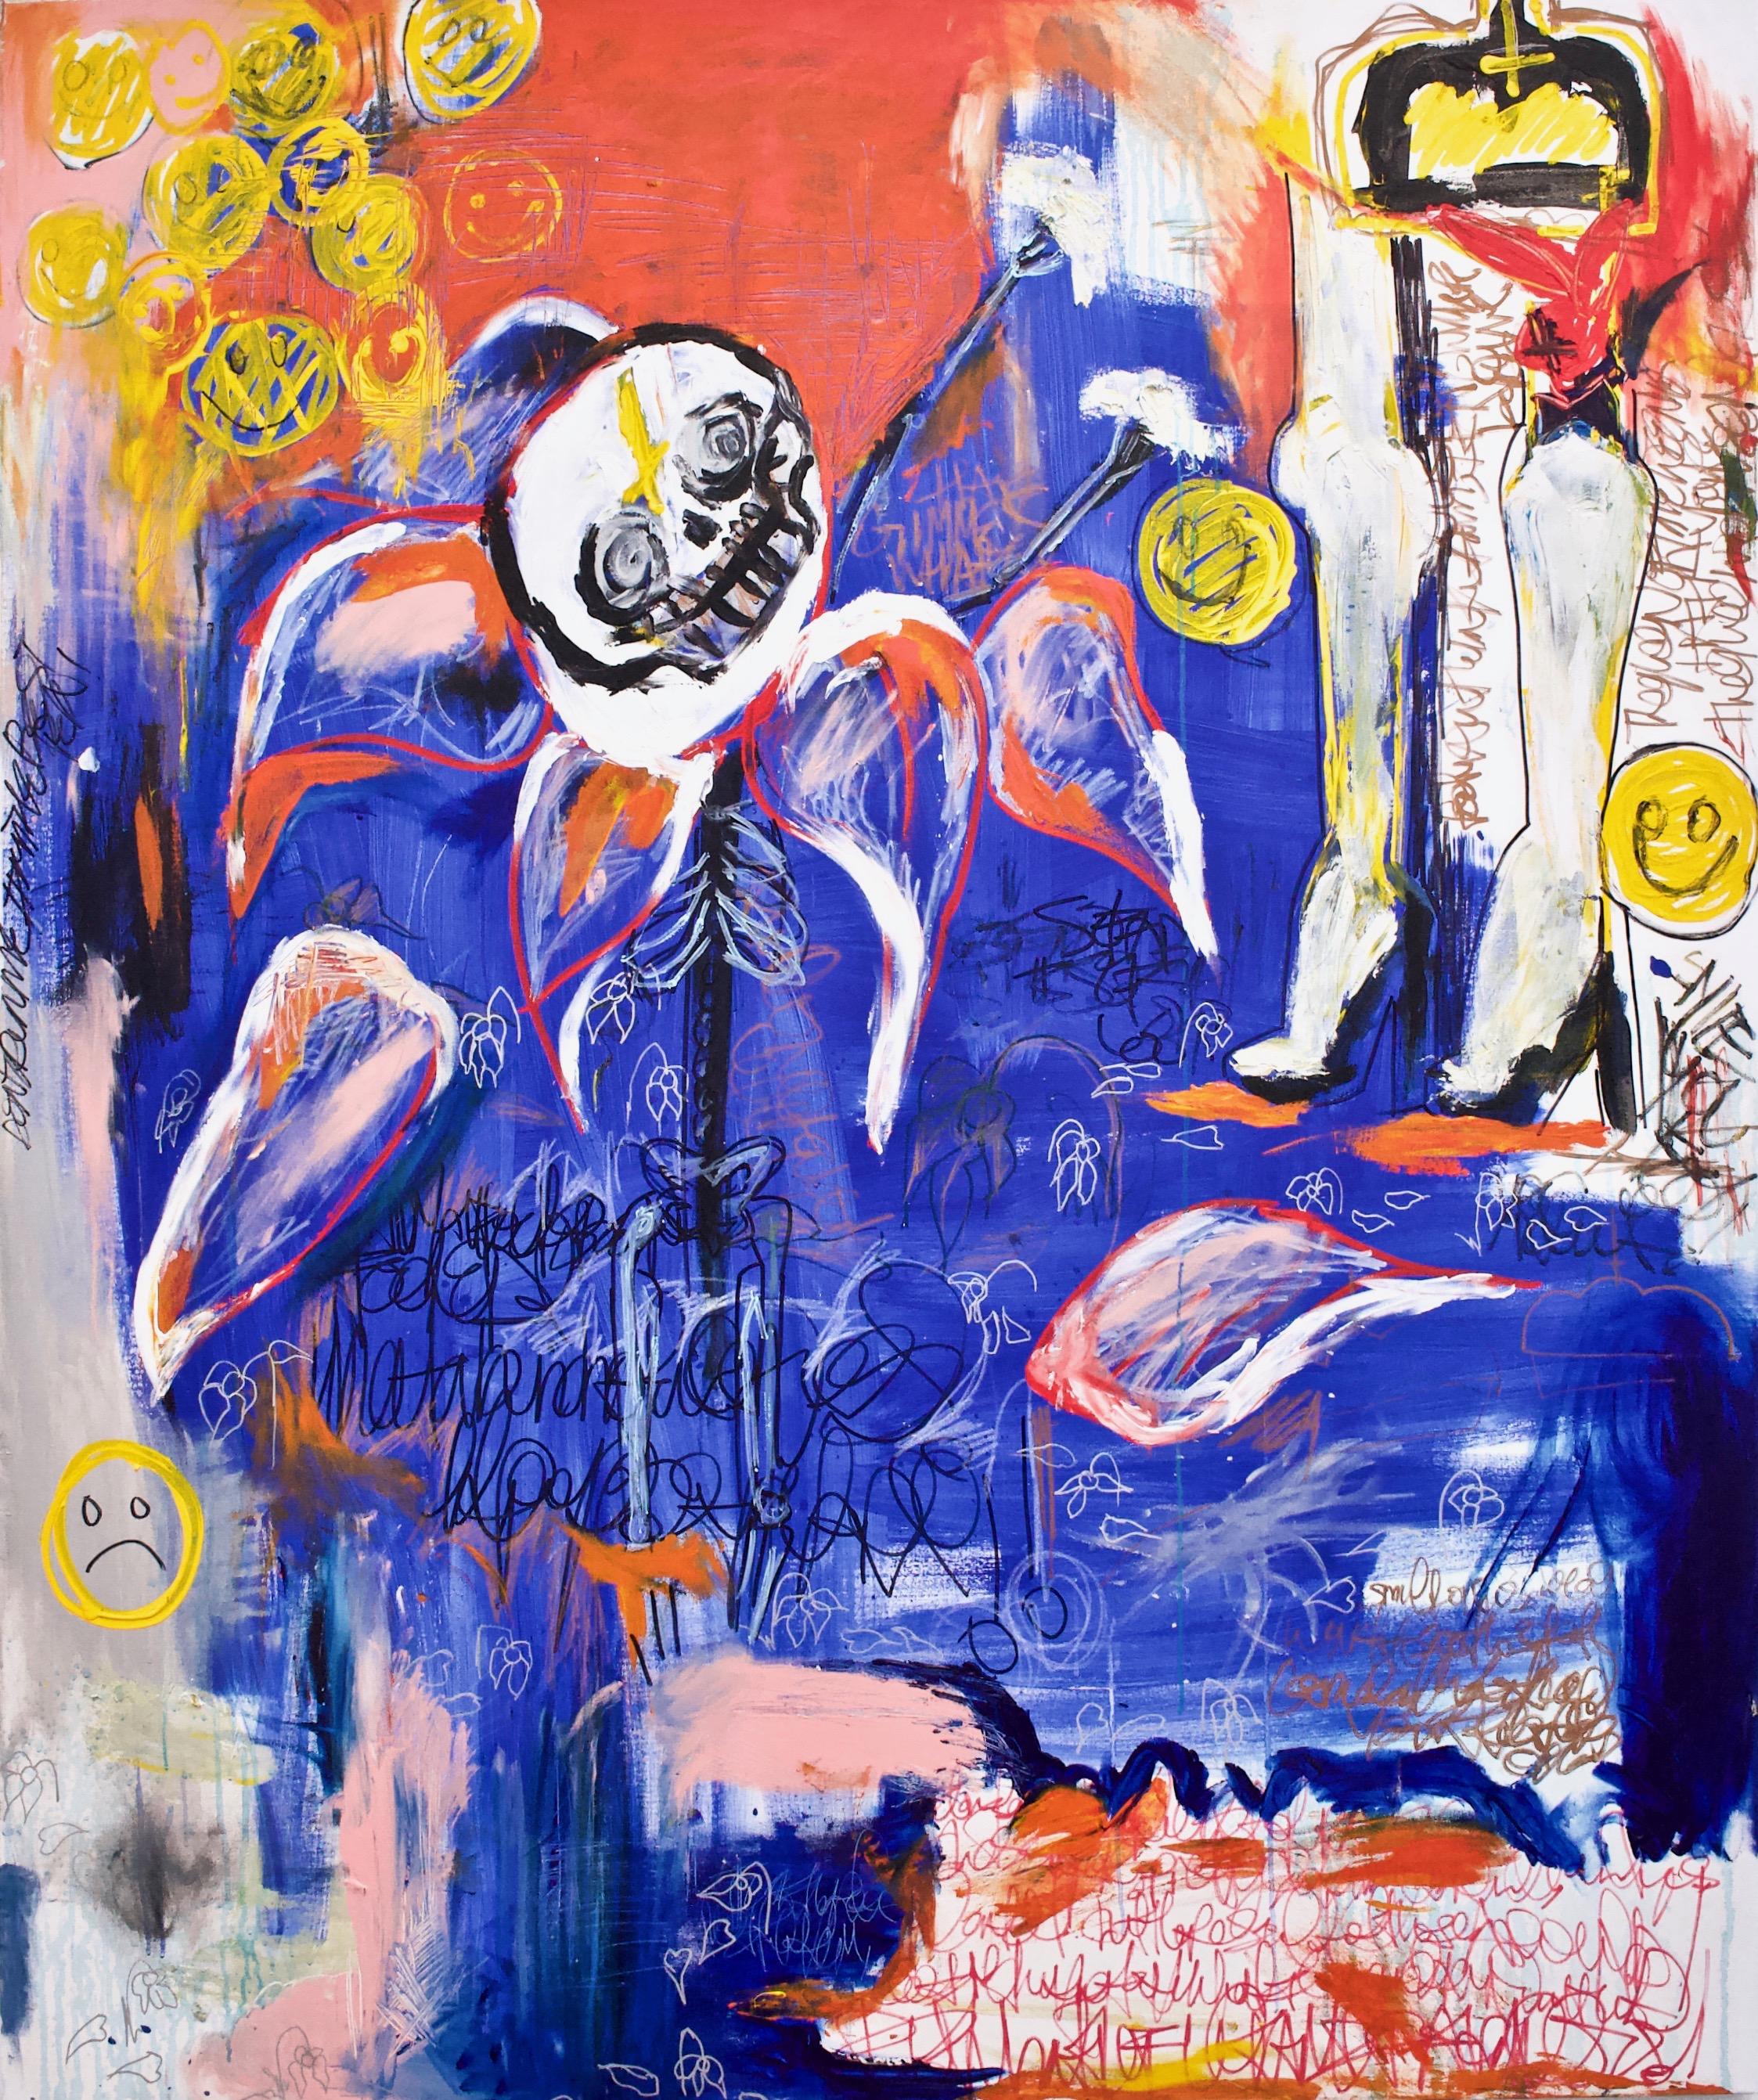 "Hungry for the Money" by Kieva Campbell is a unique mixed-media on canvas painting signed and dated by the artist on the back. The original abstract painting measures 72" H x 60" W. The sides of the oversized canvas are painted white, and it does